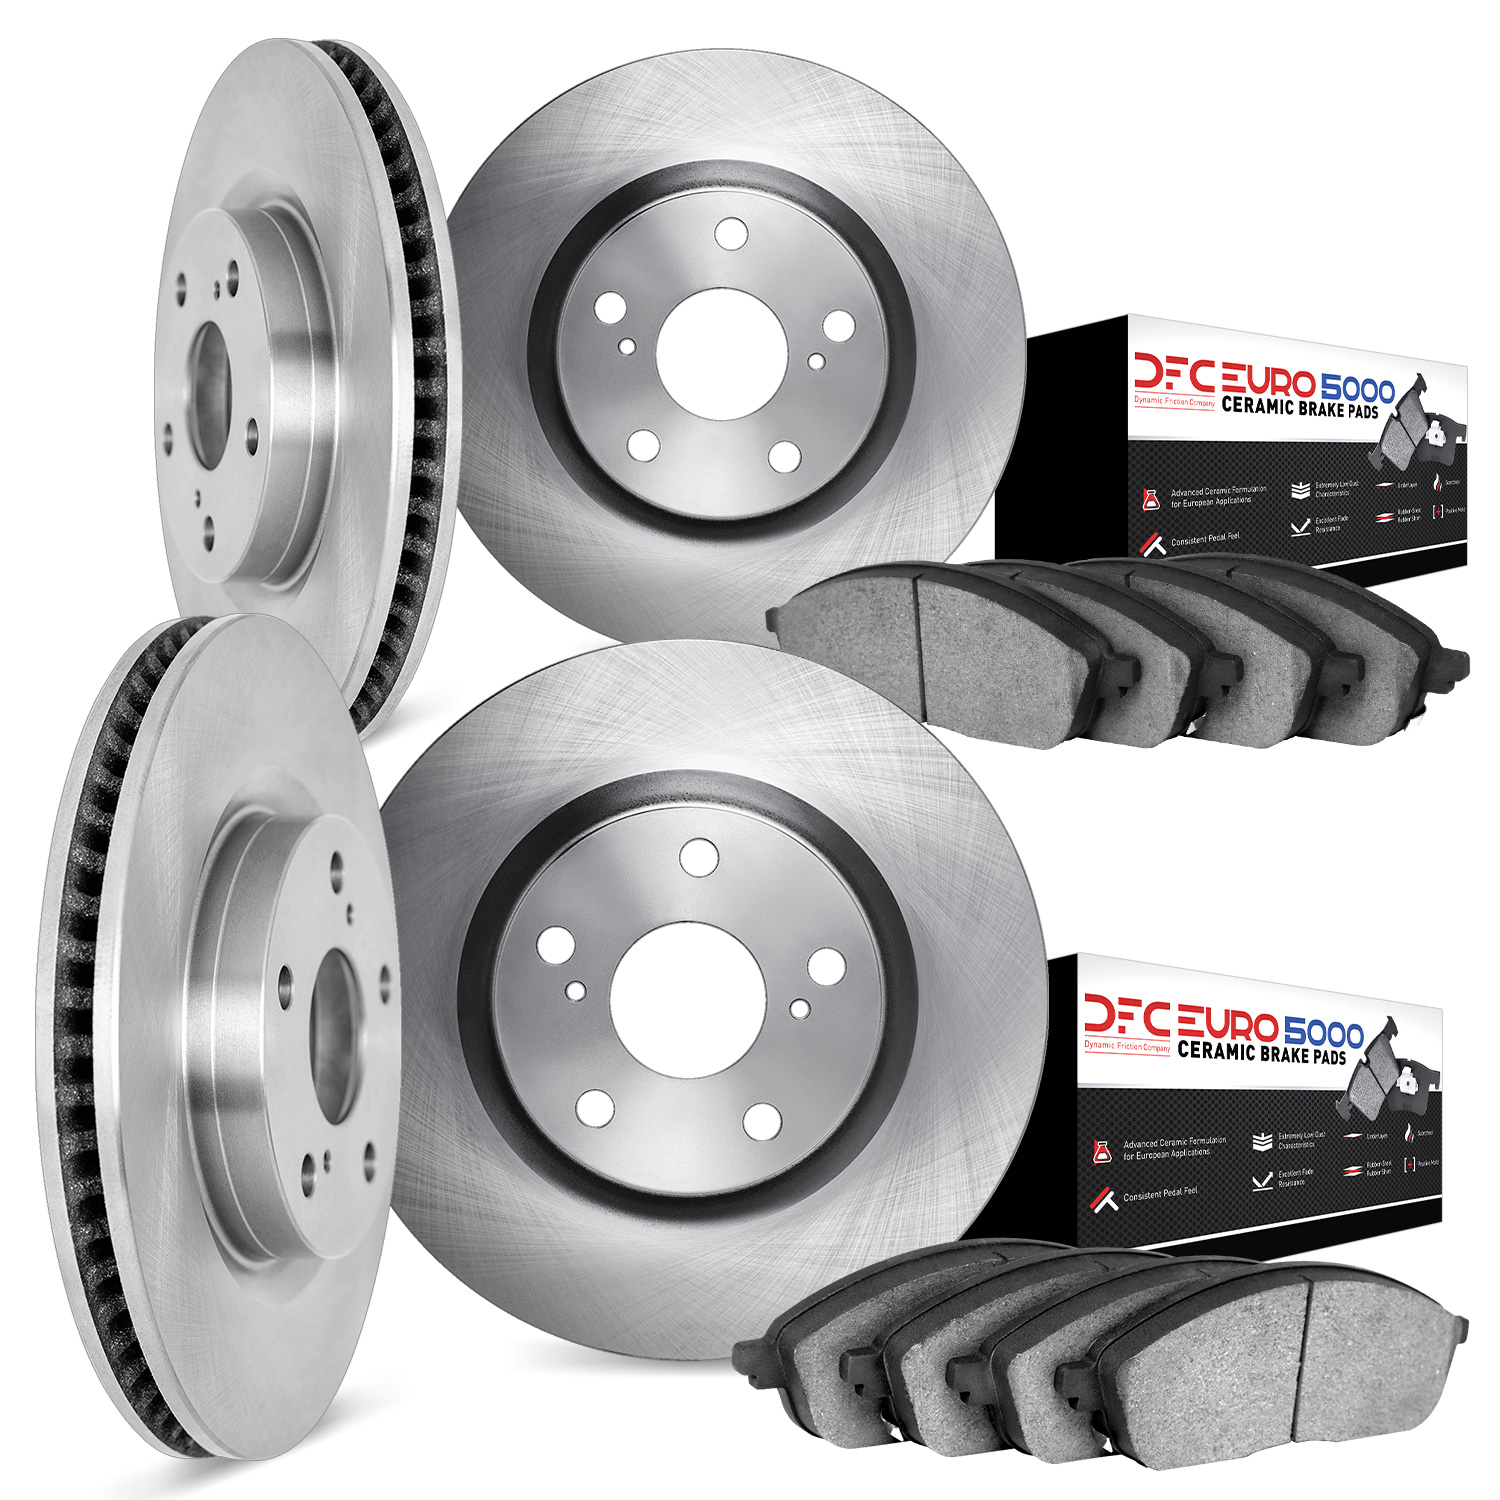 6604-31015 Brake Rotors w/5000 Euro Ceramic Brake Pads, 2000-2003 BMW, Position: Front and Rear